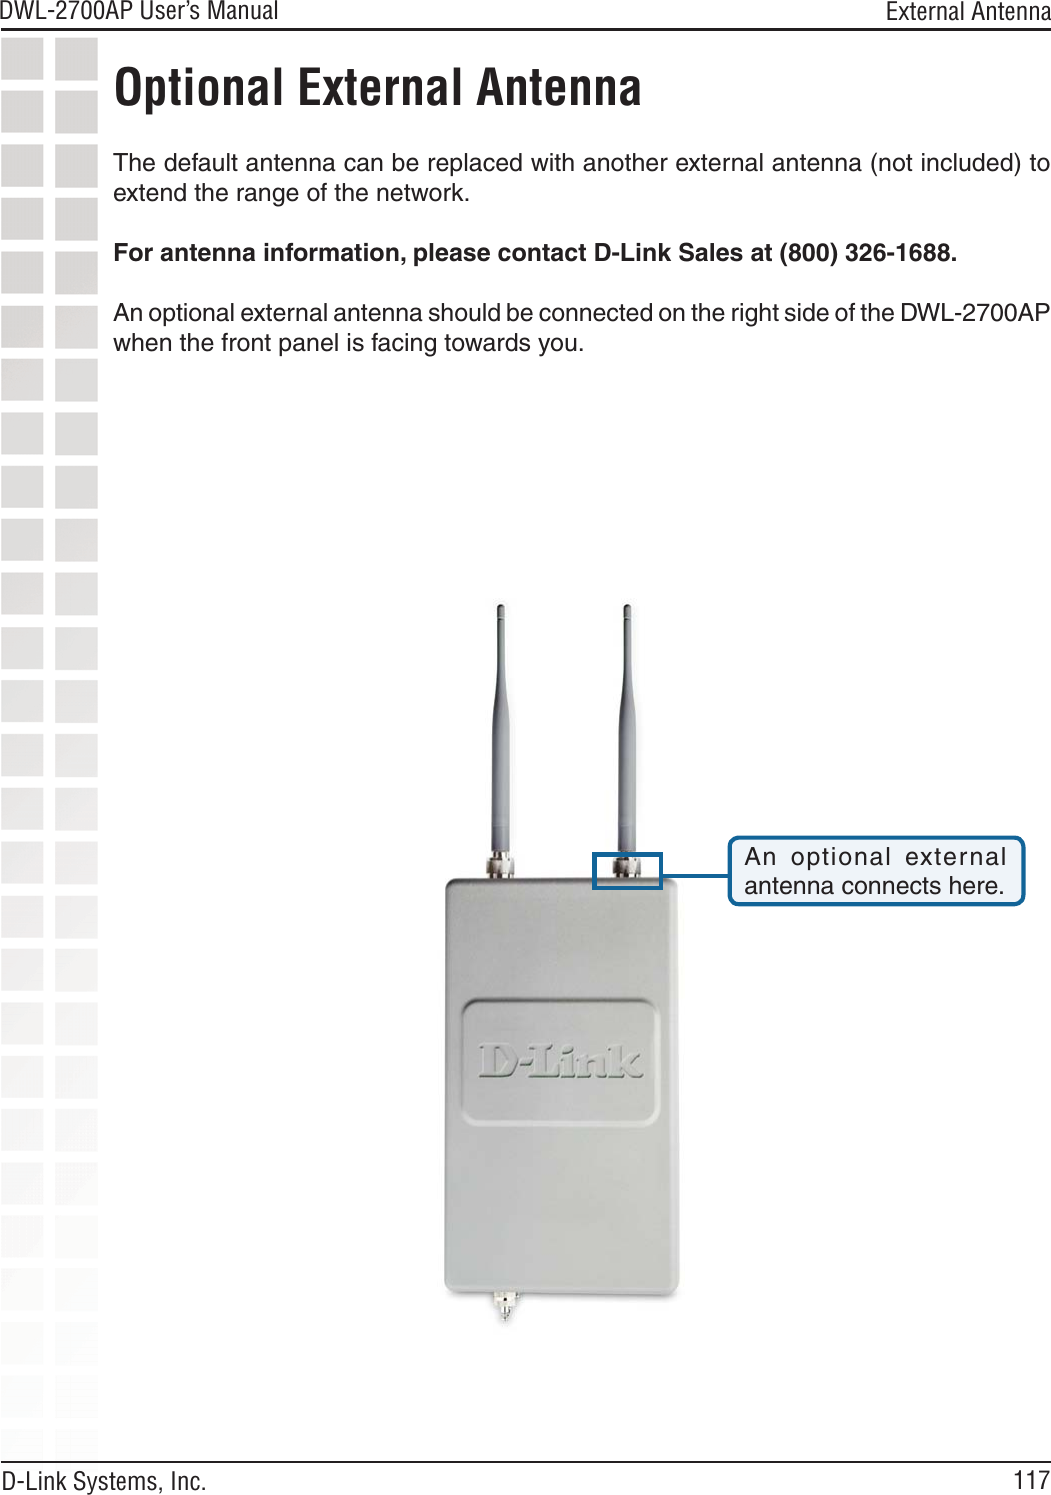 117DWL-2700AP User’s Manual D-Link Systems, Inc. External AntennaOptional External AntennaThe default antenna can be replaced with another external antenna (not included) to extend the range of the network. For antenna information, please contact D-Link Sales at (800) 326-1688.An optional external antenna should be connected on the right side of the DWL-2700AP when the front panel is facing towards you.An  optional  external antenna connects here.